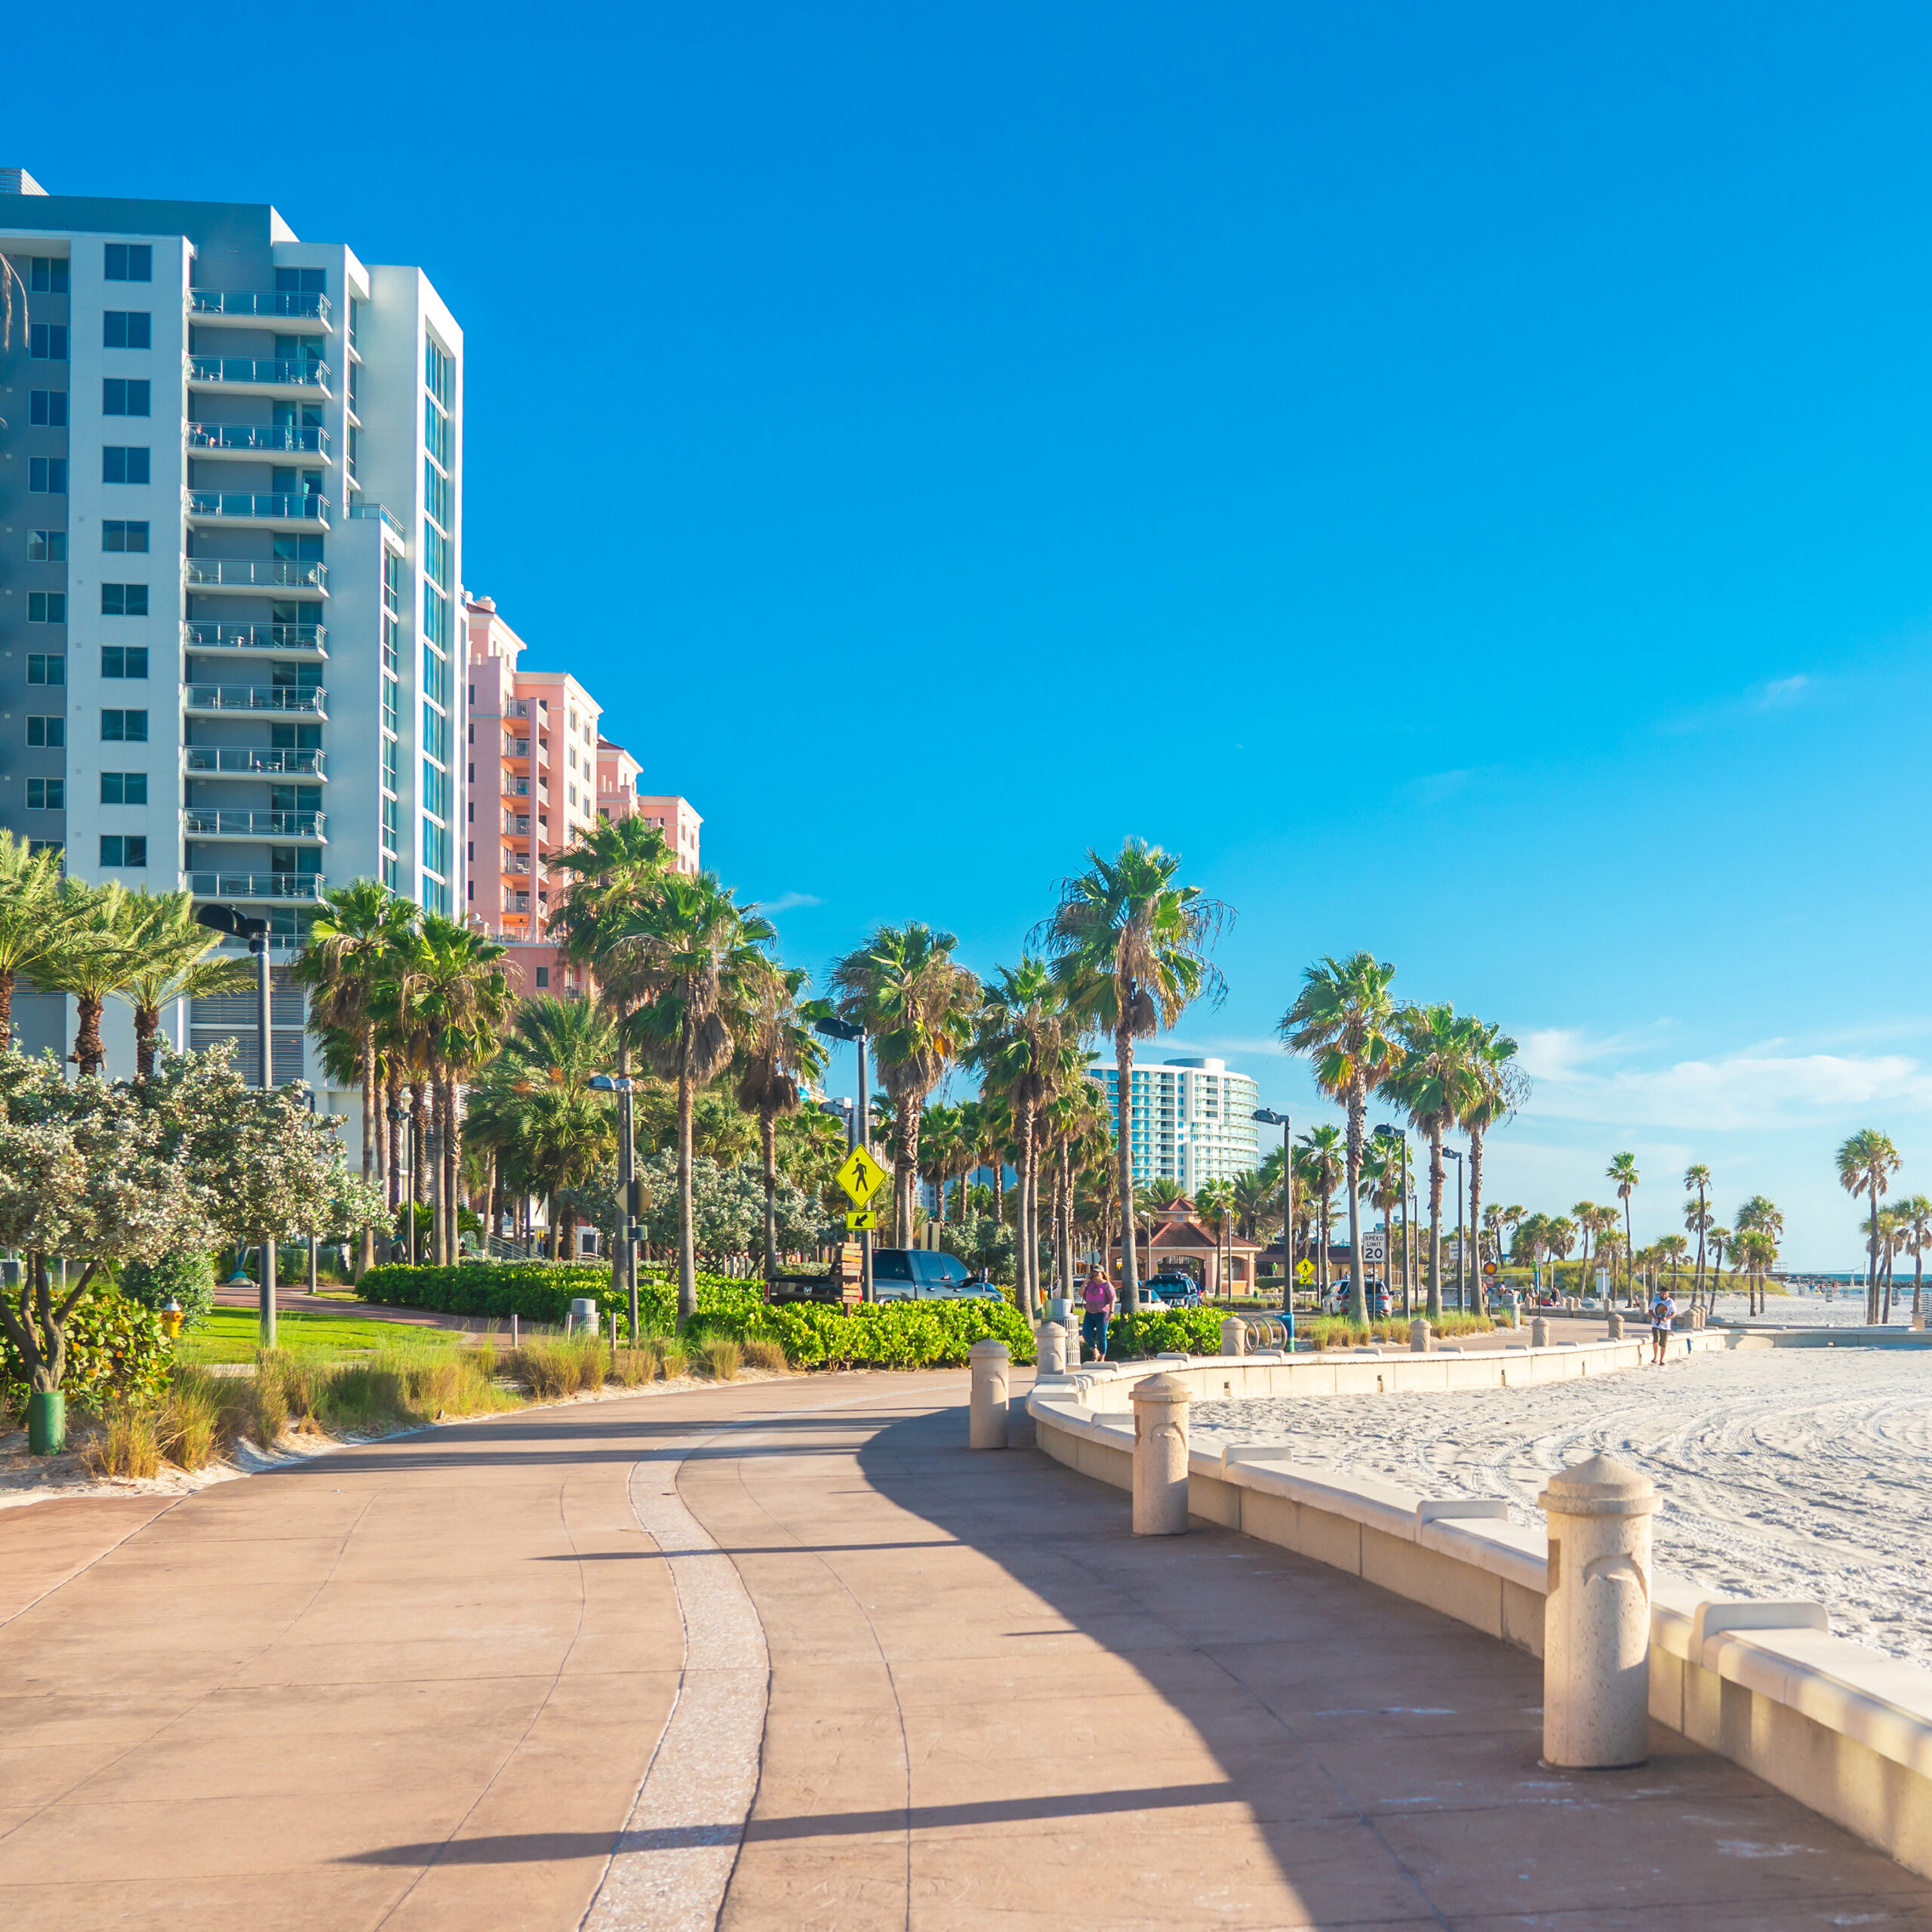 Housing Market Industry Updates for Florida